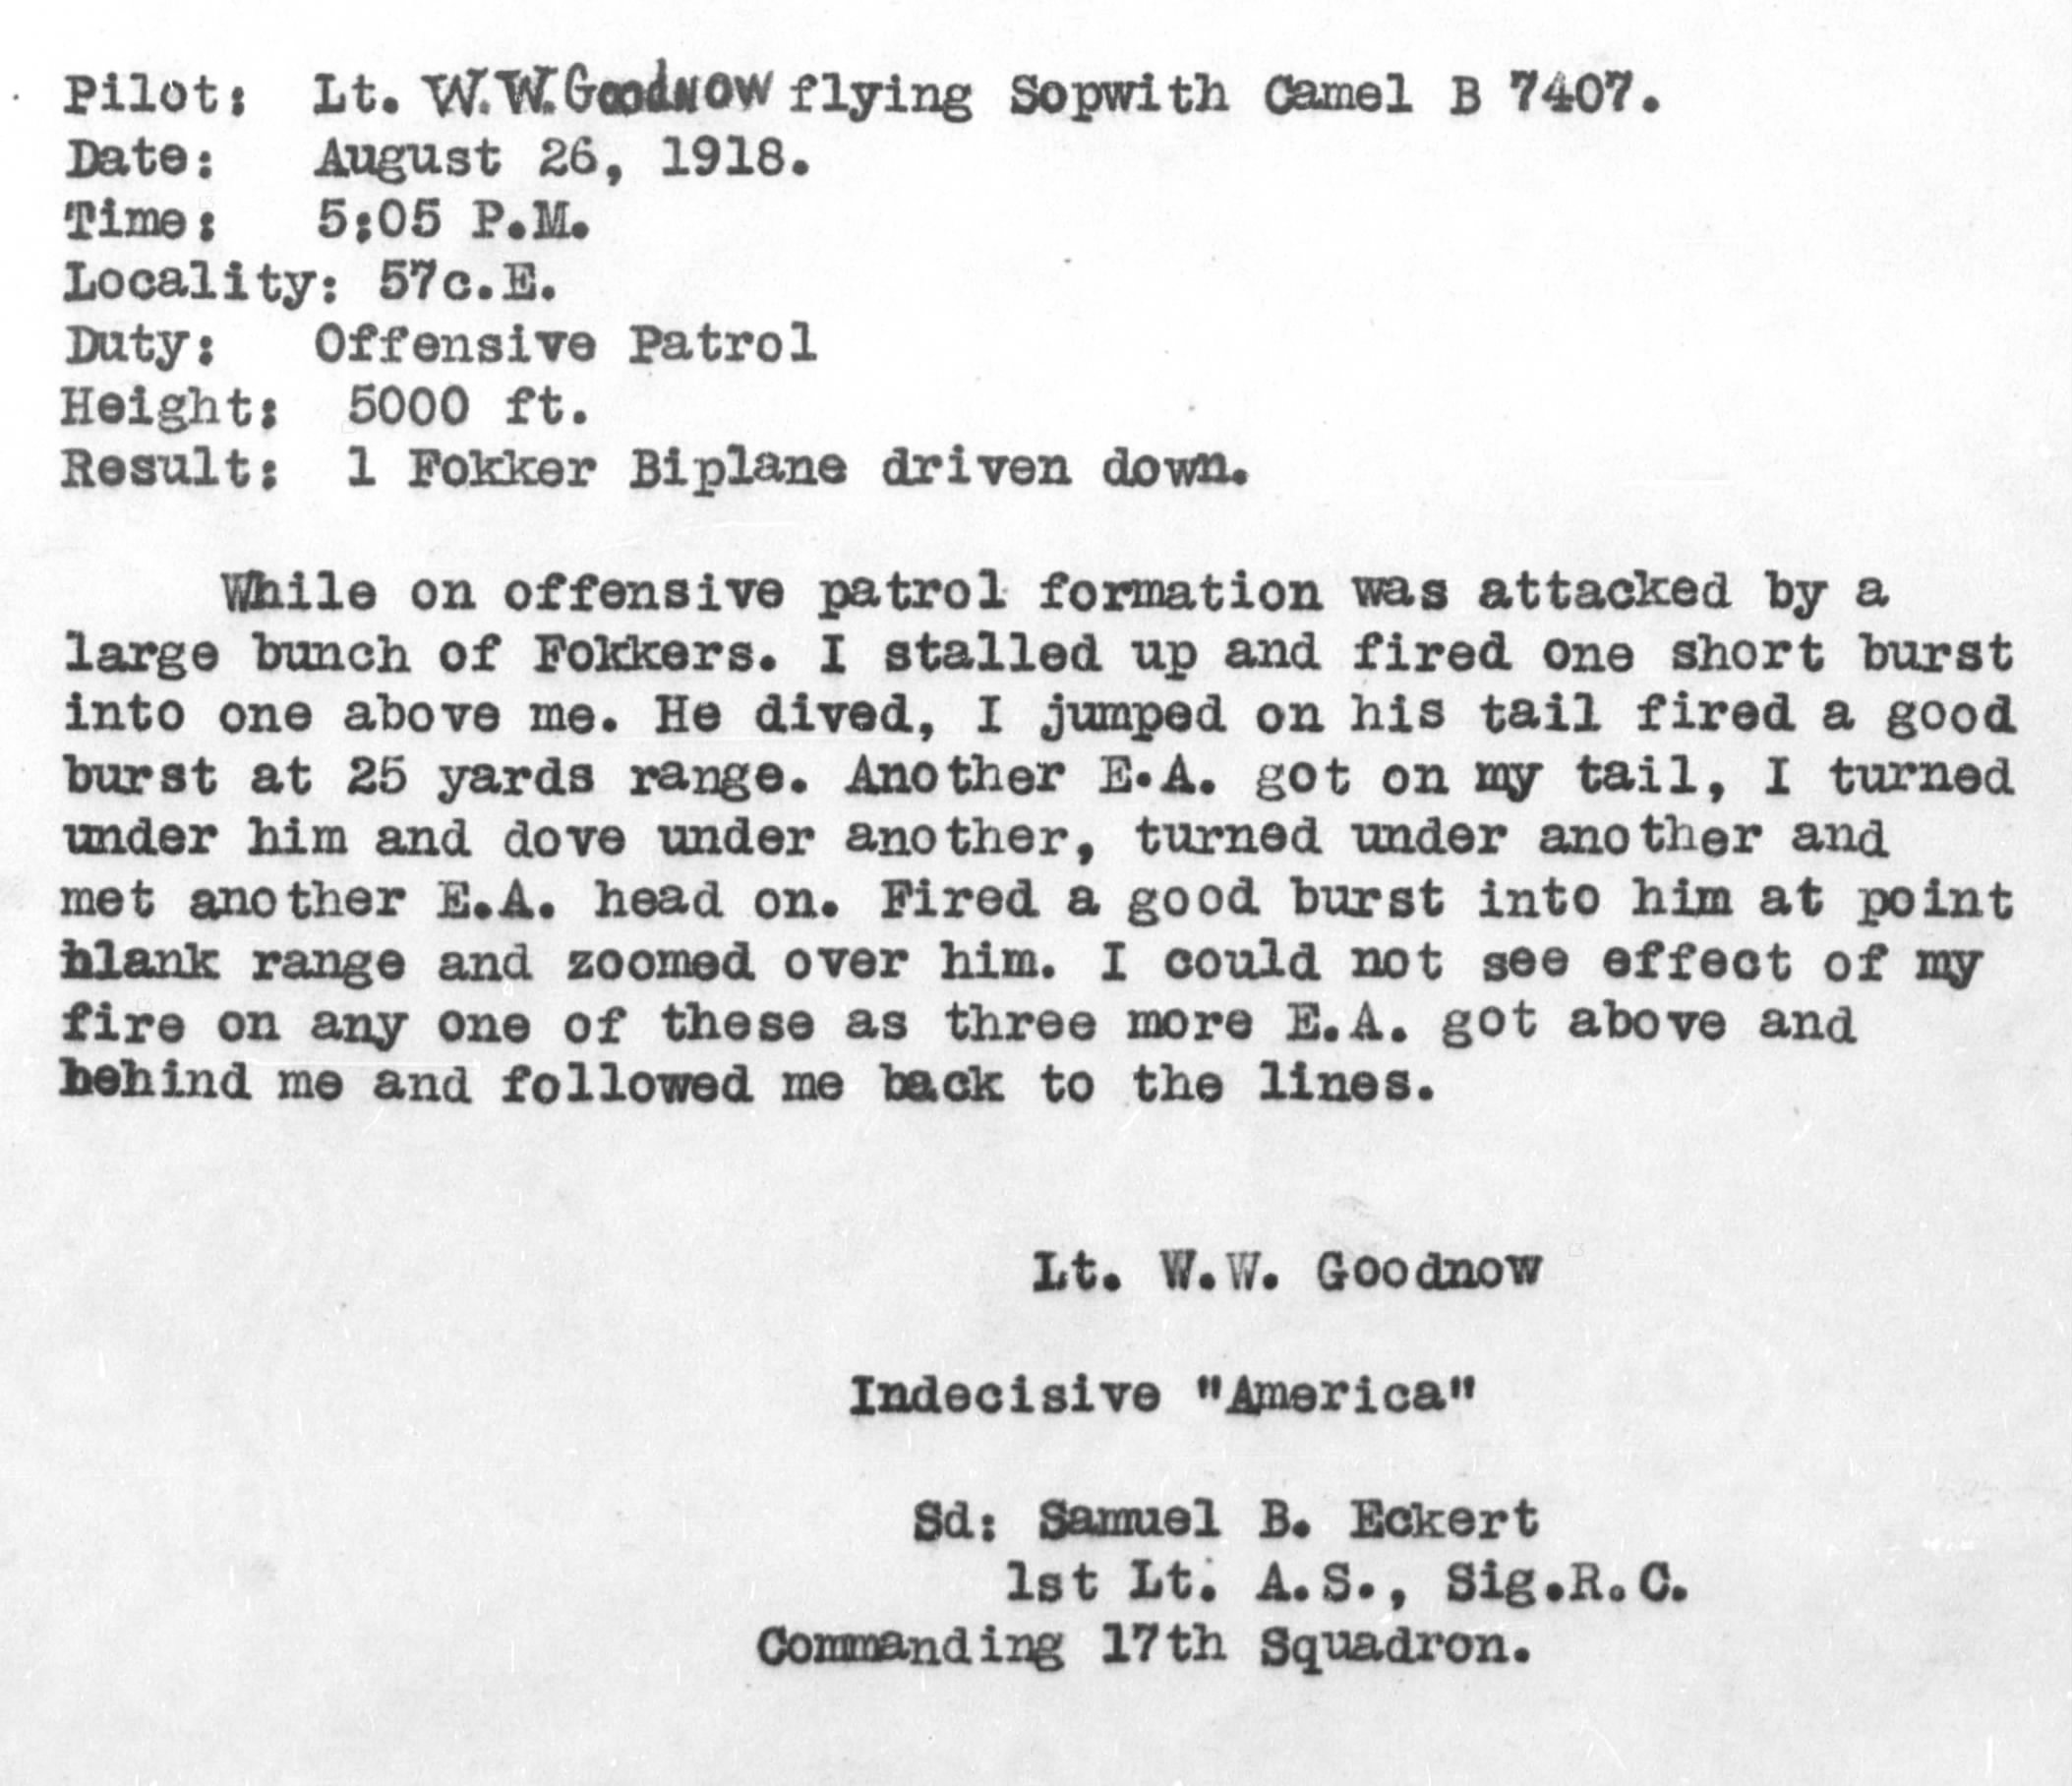 A typed combat report for Goodnow's indecisive efforts to shoot down enemy planes on August 26, 1918.